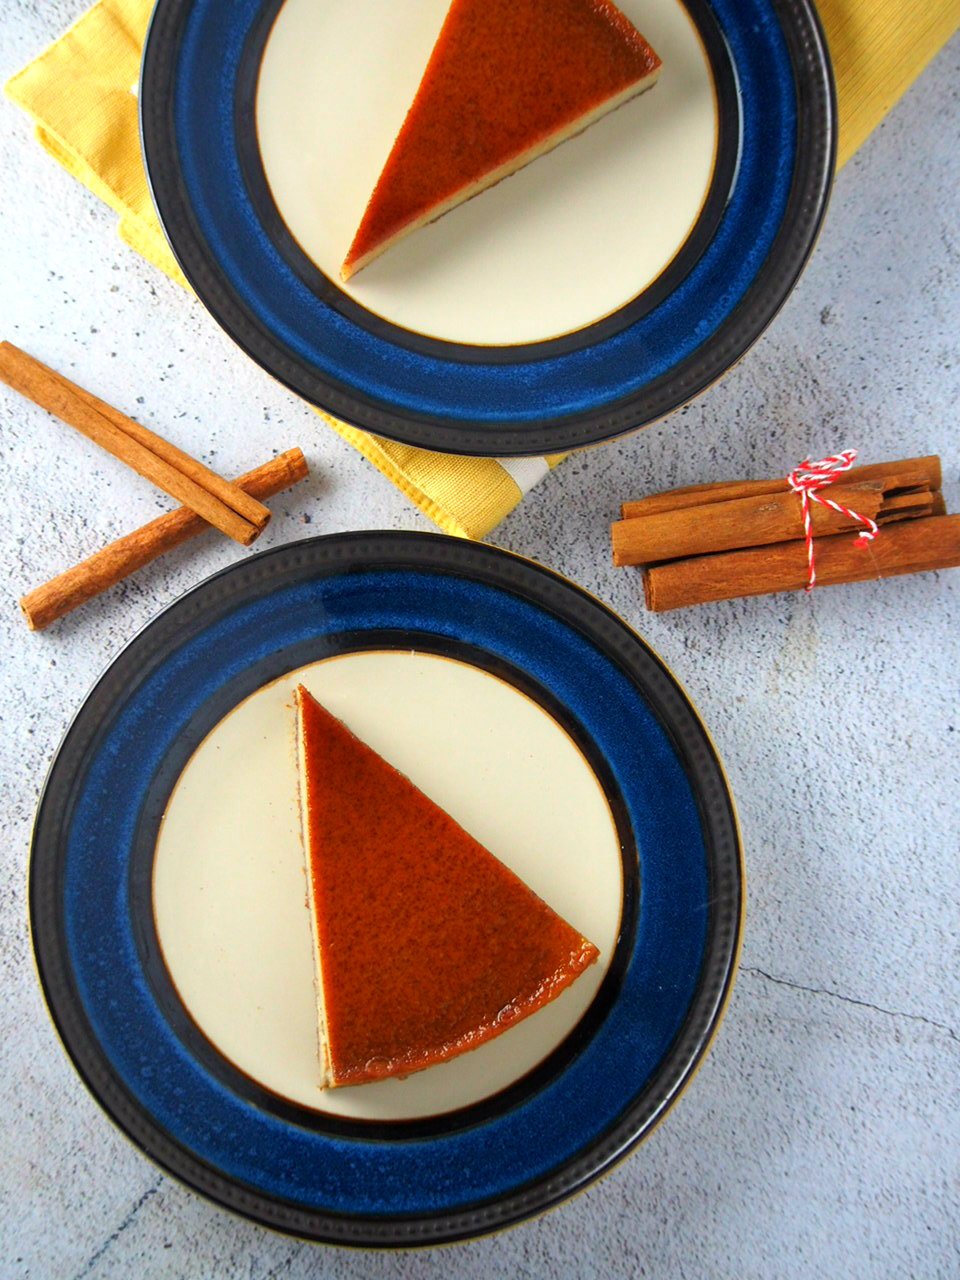 Slices of Cinnamon Flan, each in a saucer plate.